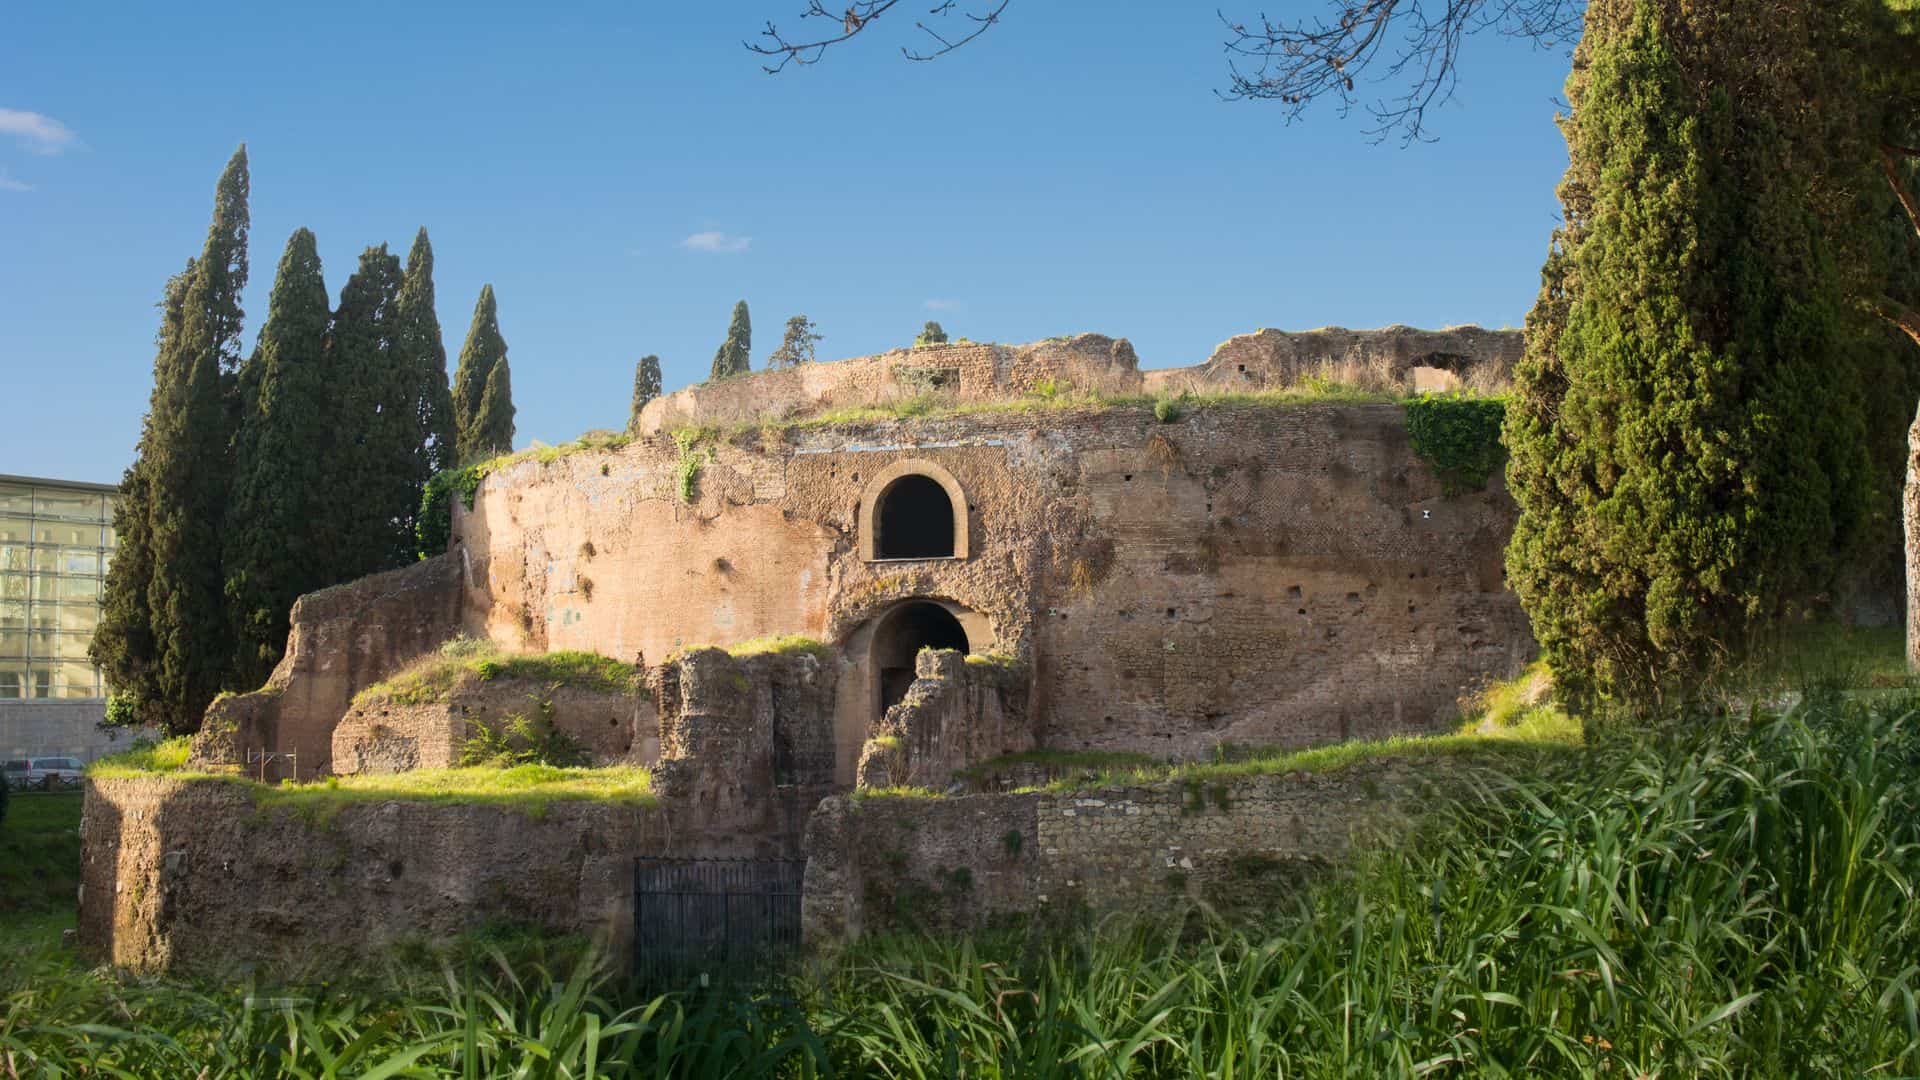 A view of the Mausoleum of Augustus from the outside on a sunny day.